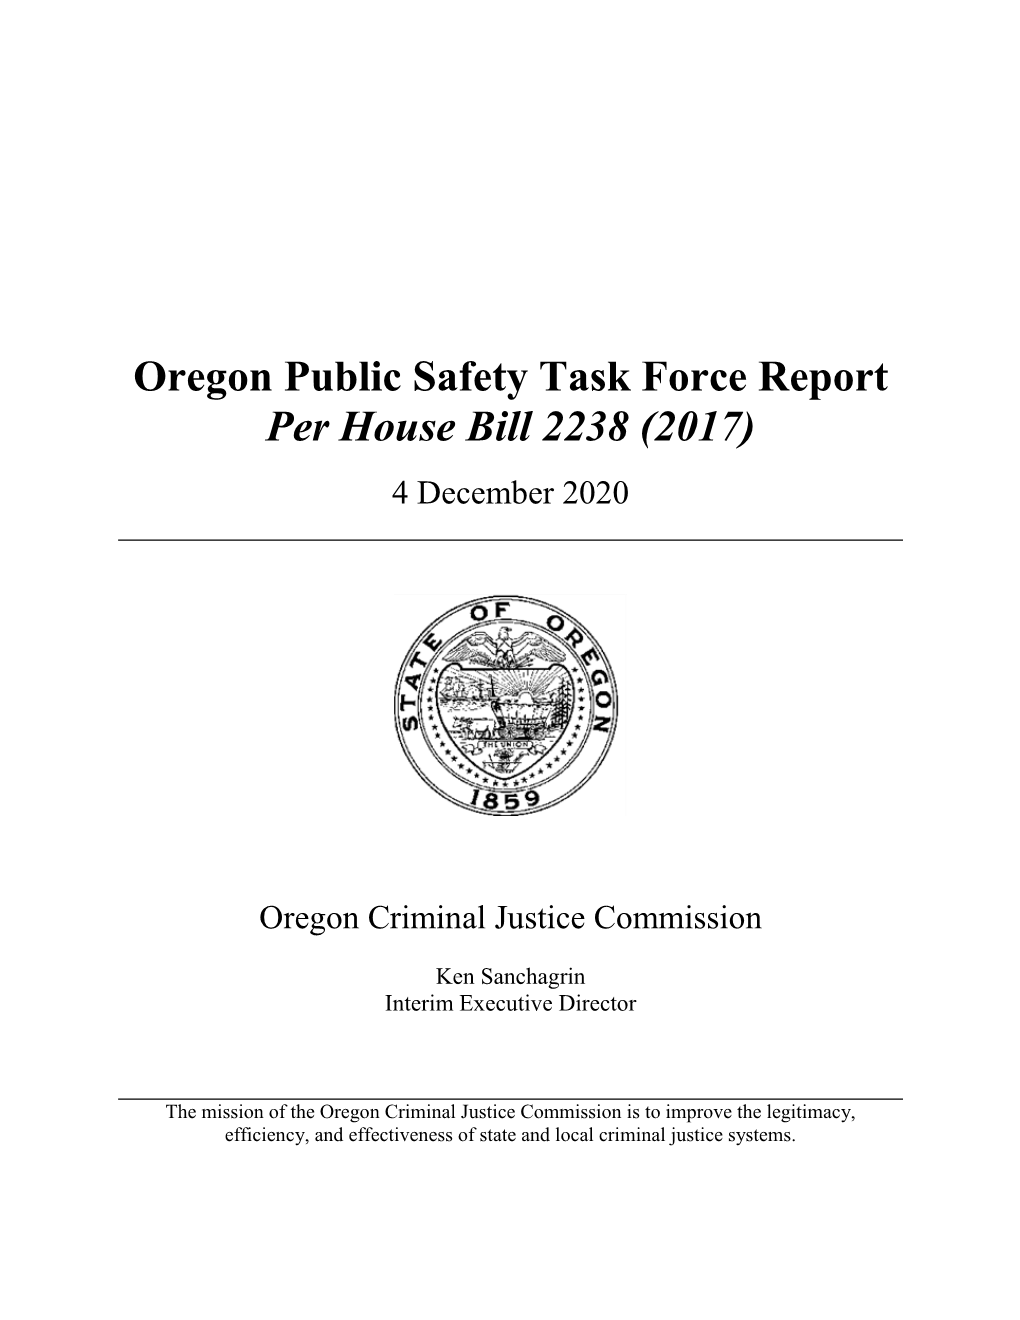 Oregon Public Safety Task Force Report Per House Bill 2238 (2017)